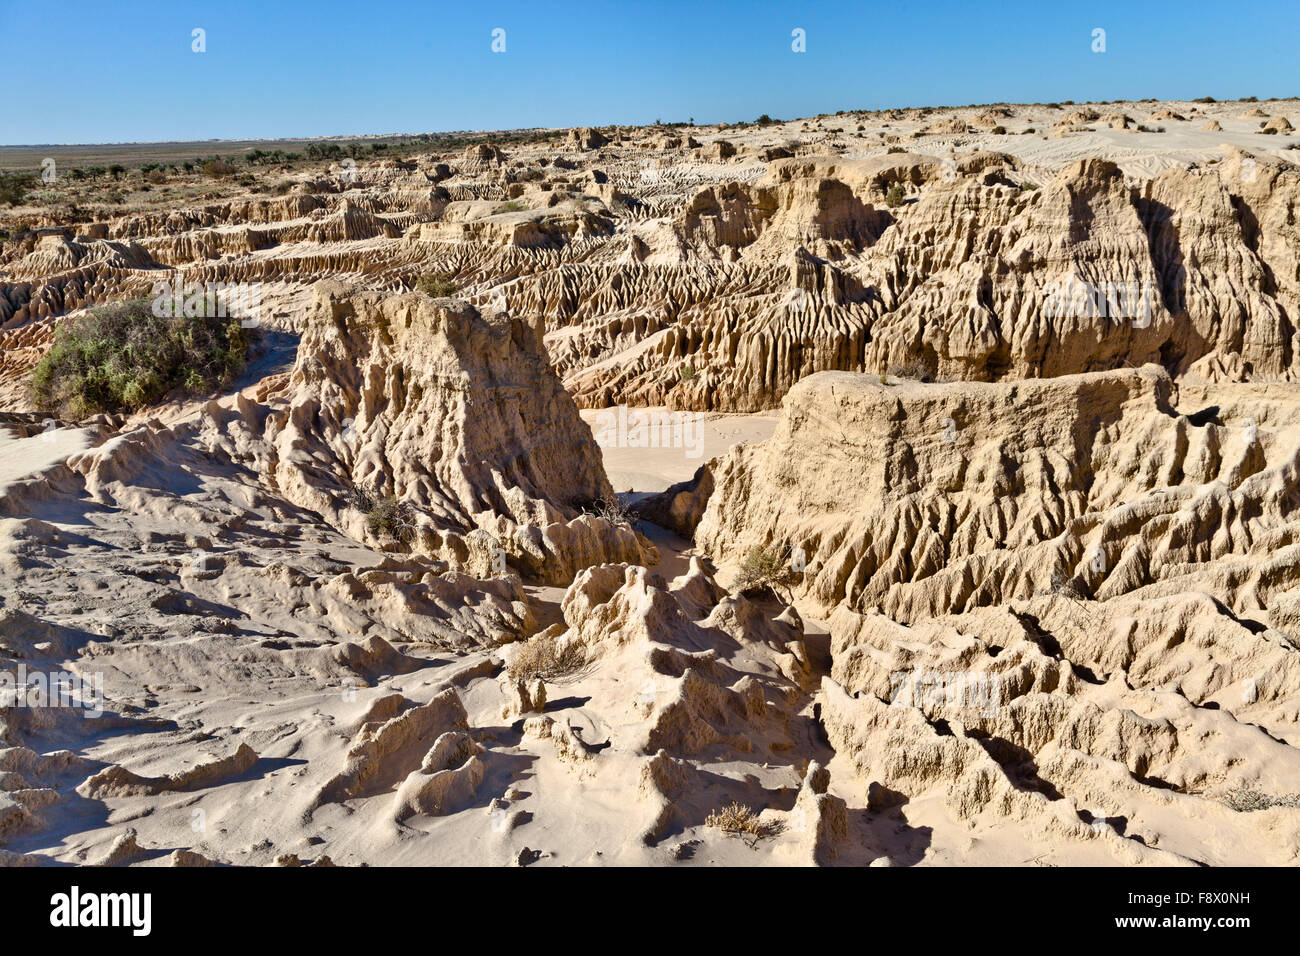 Mungo National Park, erosion patterns in the ancient sedimented shores of Mungo Lake Stock Photo